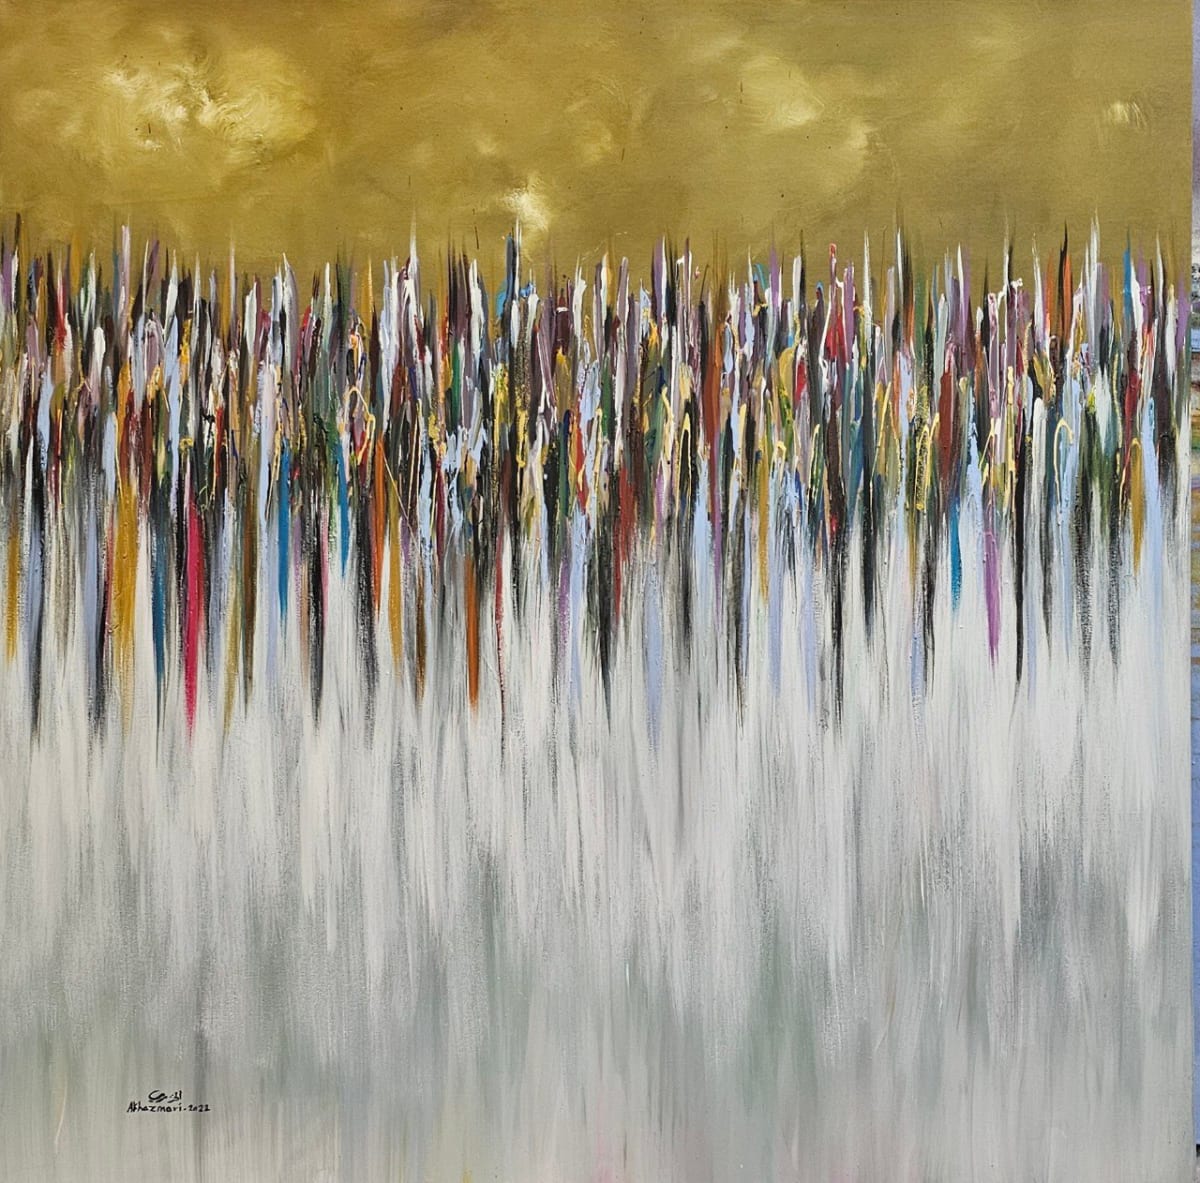 Golden Aspirations by Ahmed Al Khazmari  Image: "Golden Aspirations" — An abstract composition that embodies the human quest for enlightenment, with the golden glow symbolizing our highest aspirations and the colorful strokes reflecting the vibrant path we traverse in search of meaning.